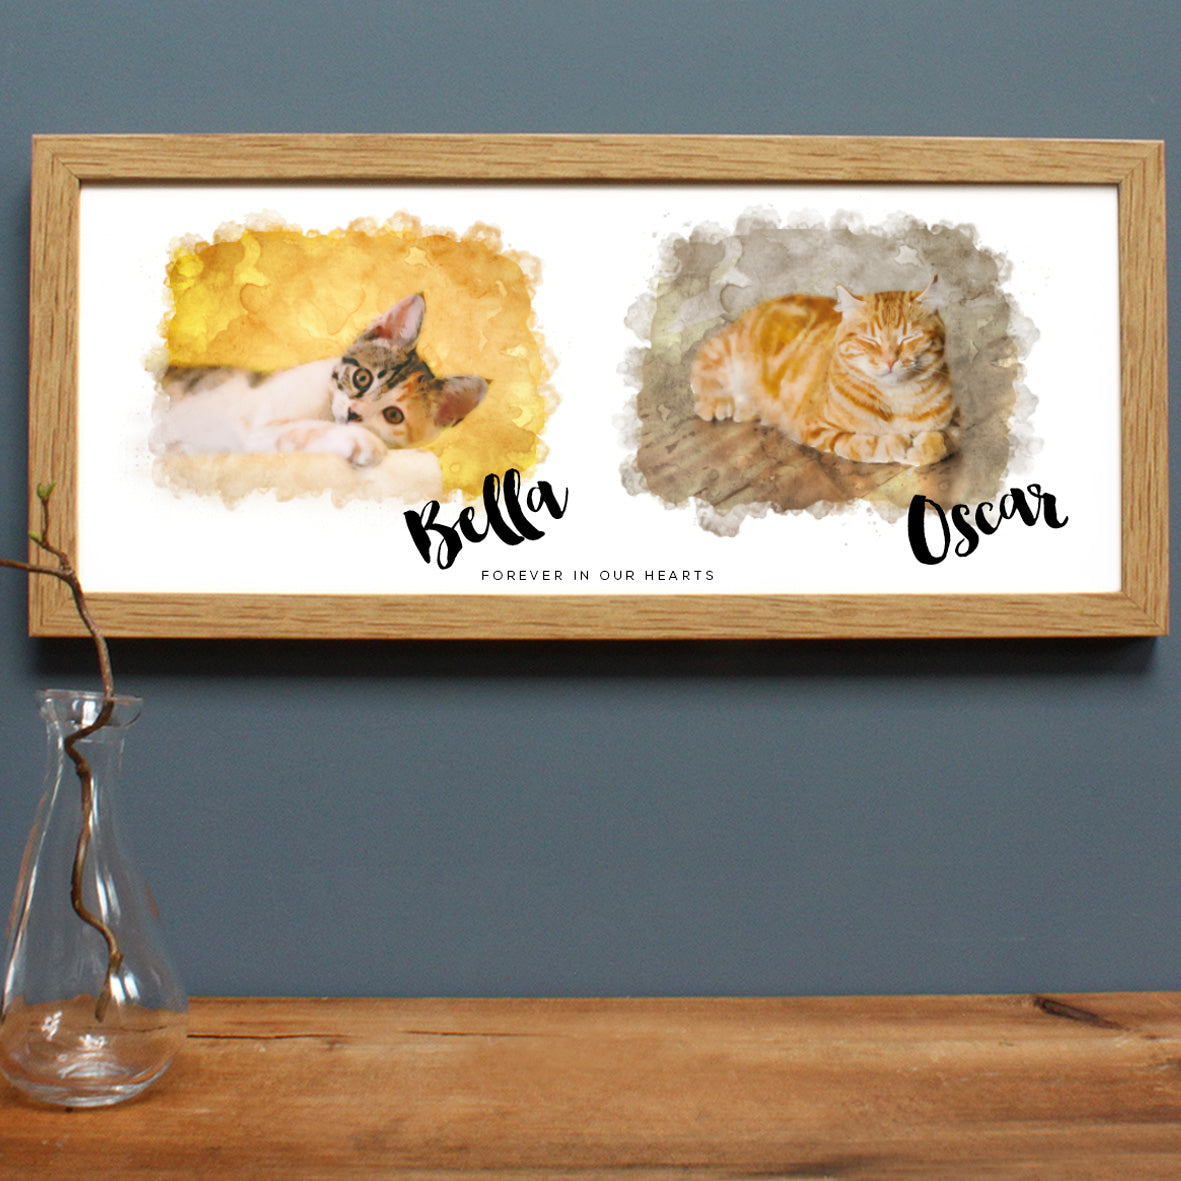 oak frame with two cat drawings, one ginger cat, one tabby and white cat